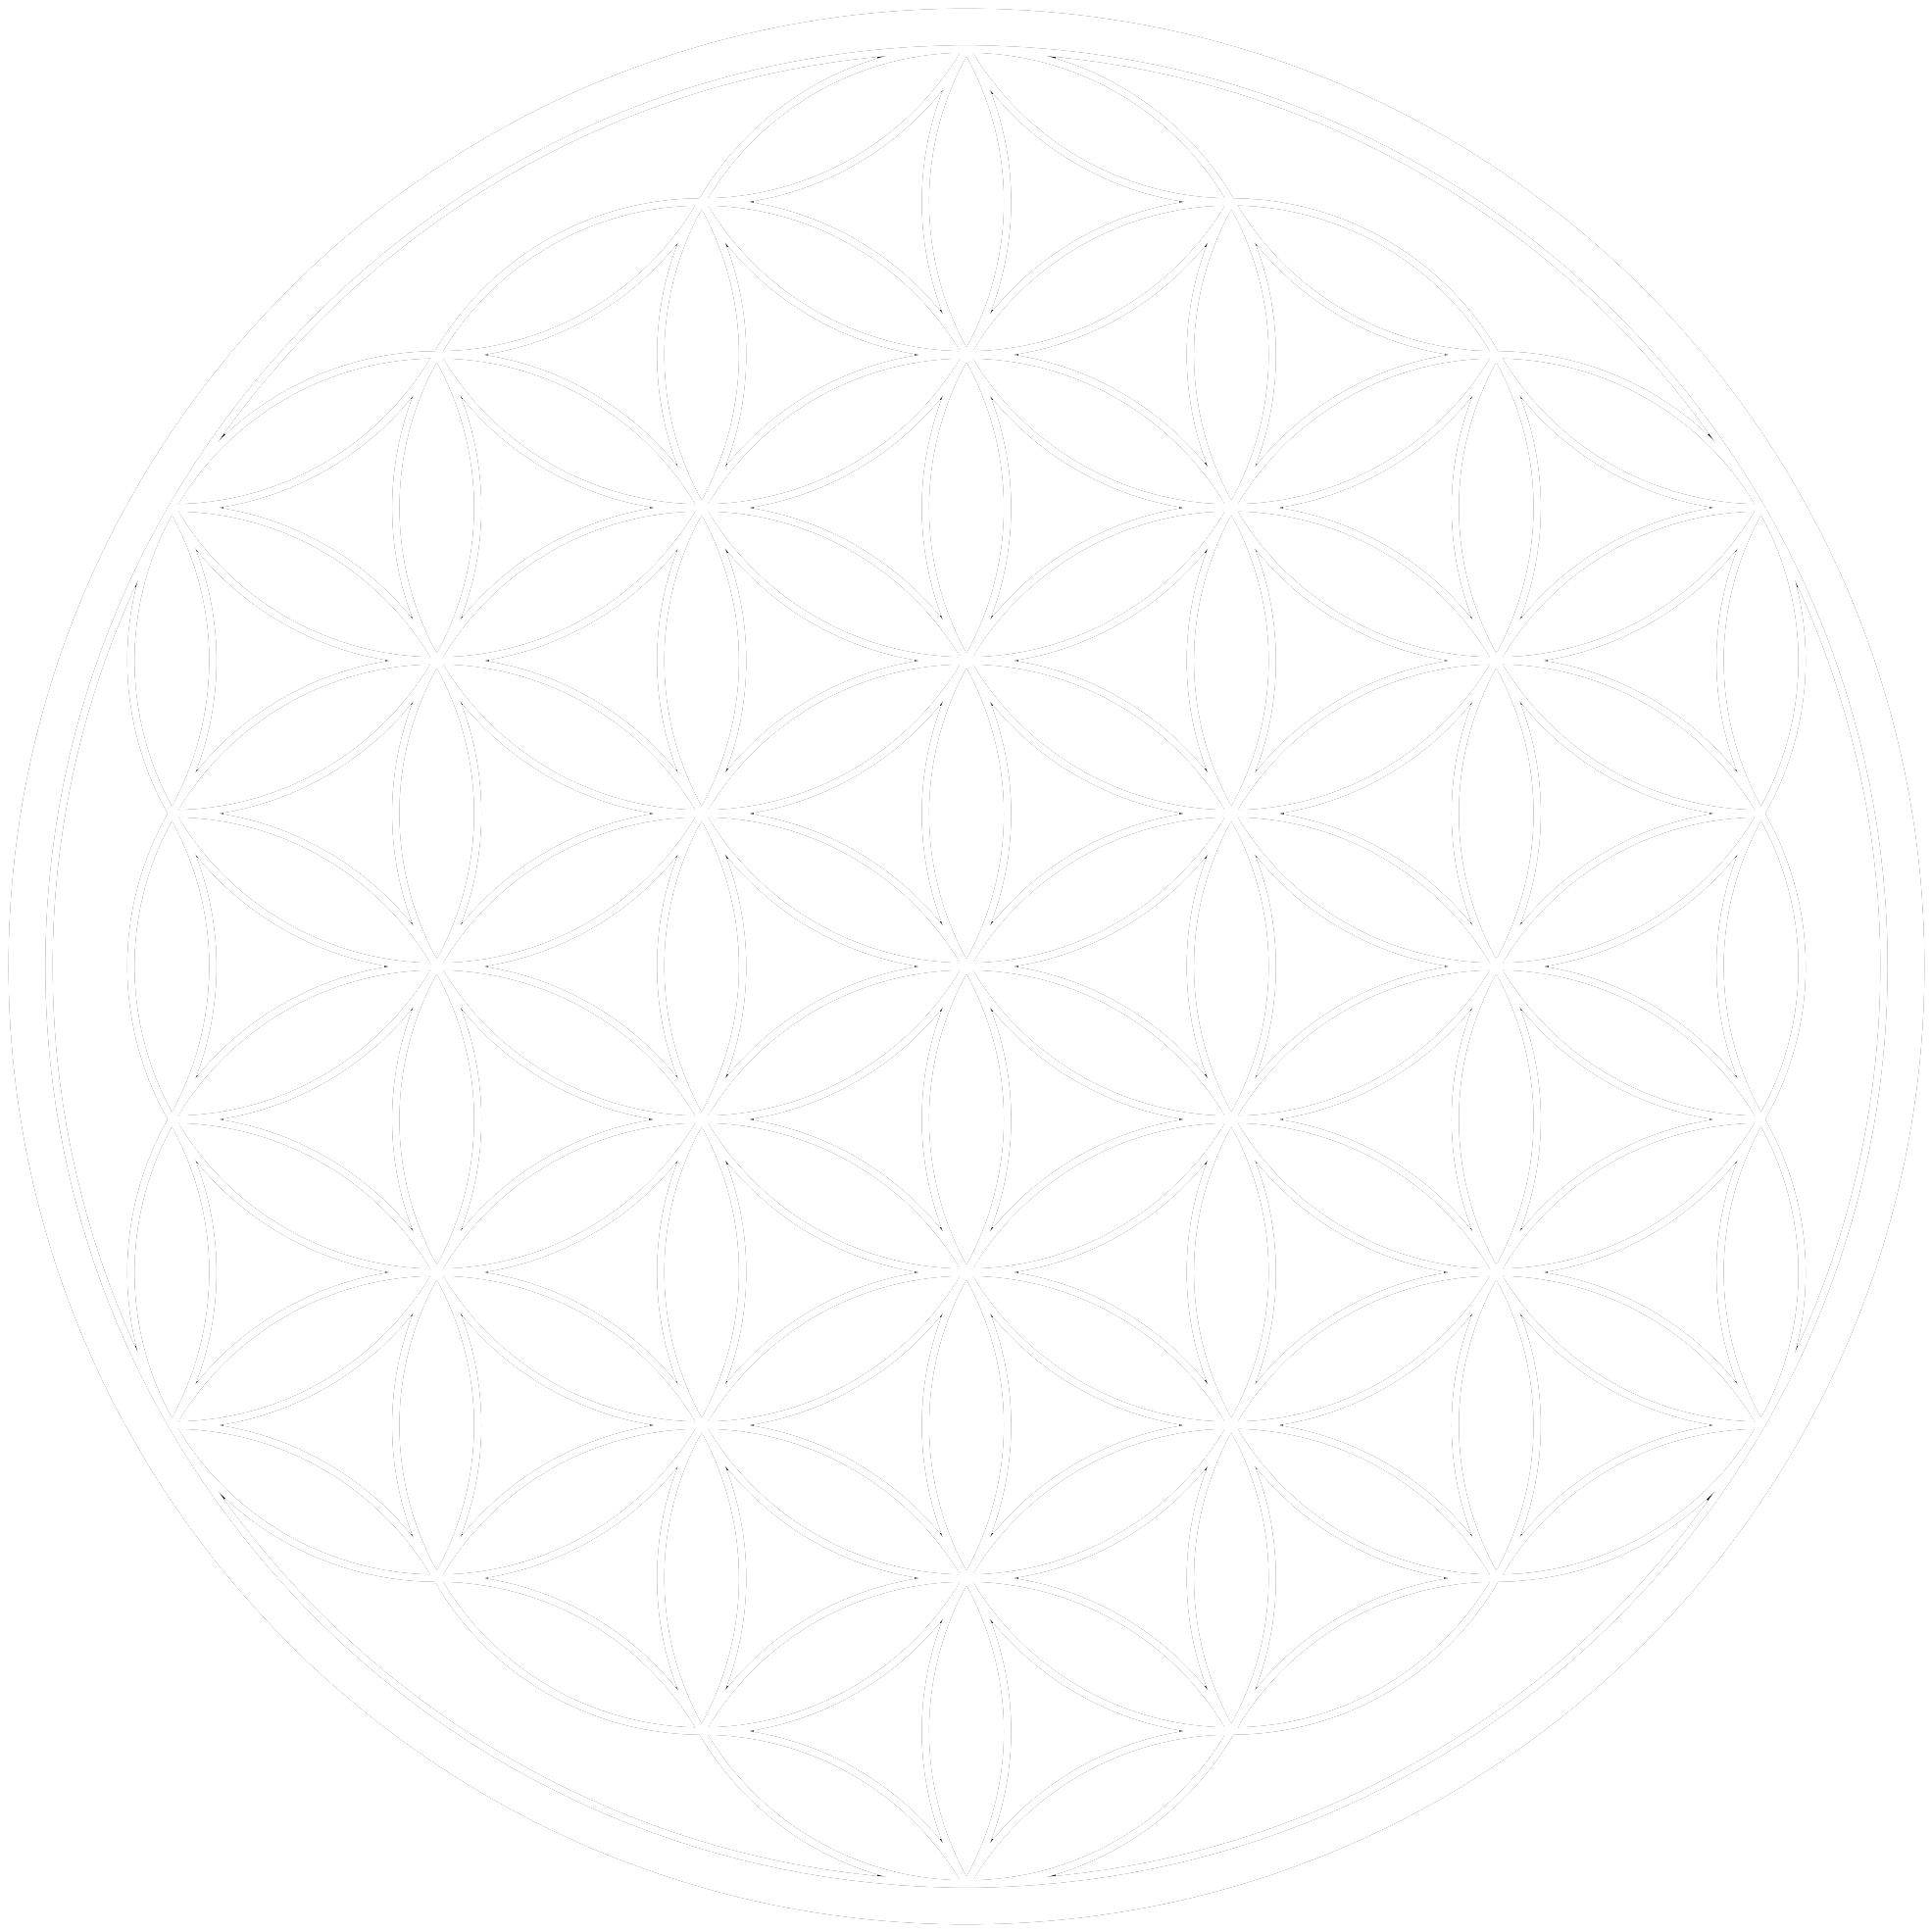 Download A White Flower Of Life Symbol [100% Free] - FastPNG